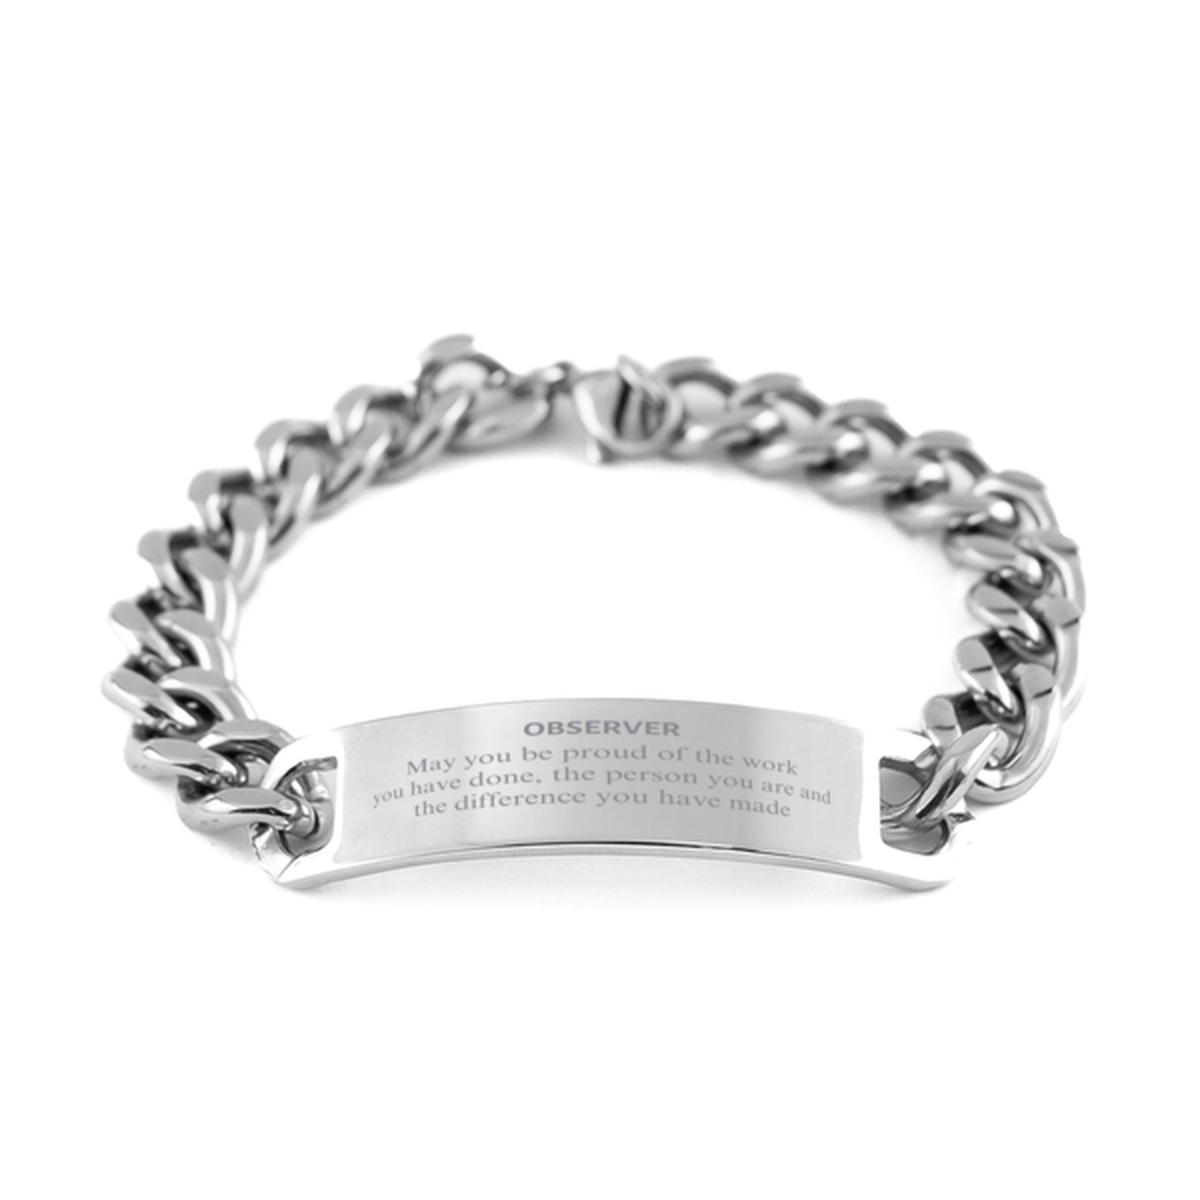 Observer May you be proud of the work you have done, Retirement Observer Cuban Chain Stainless Steel Bracelet for Colleague Appreciation Gifts Amazing for Observer